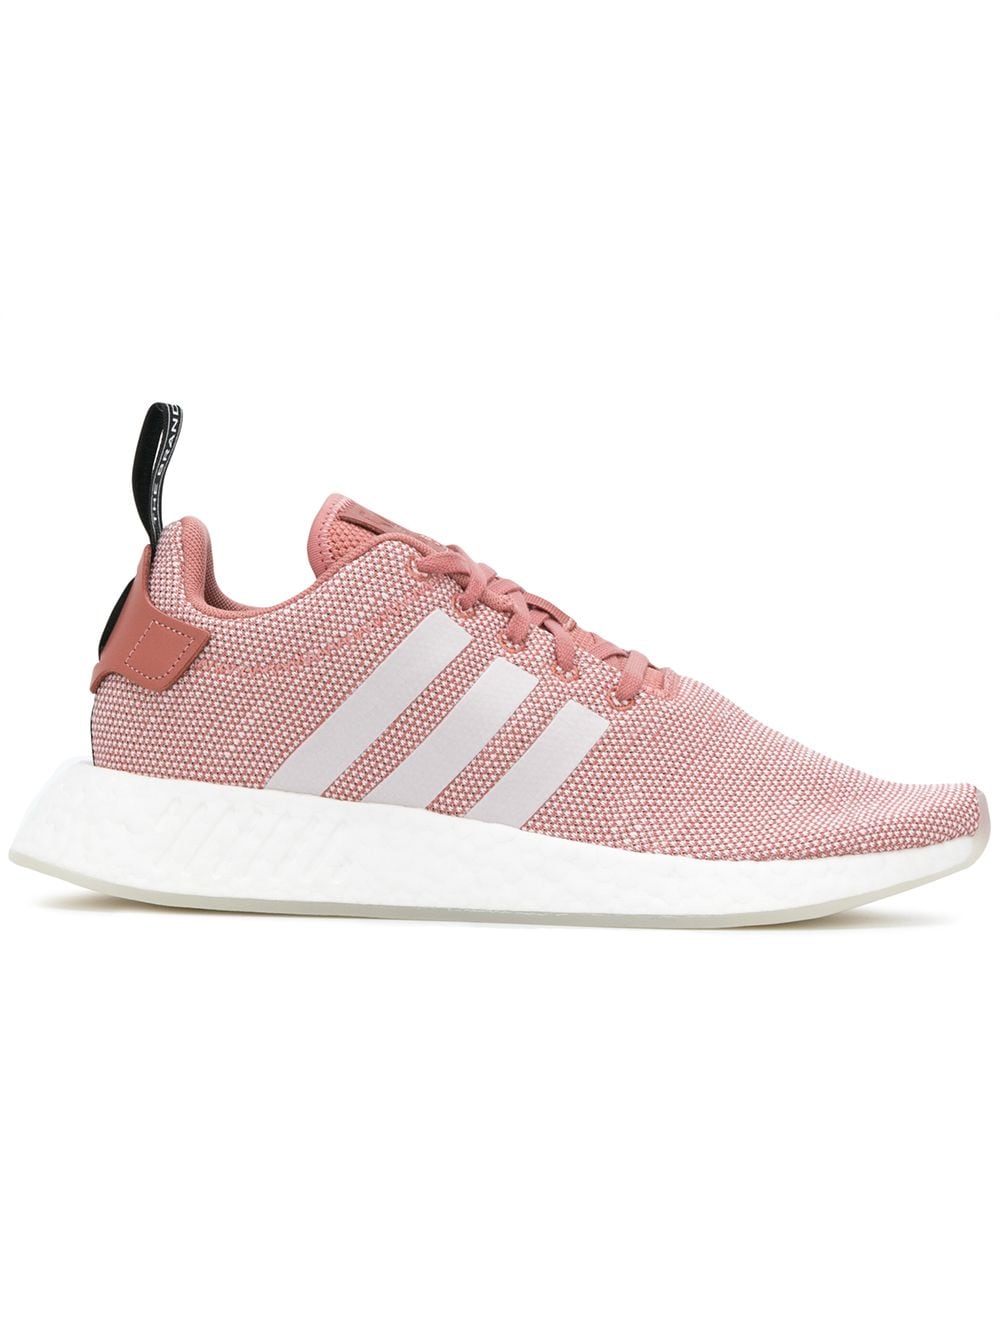 adidas NMD R2 low-top sneakers - Pink von adidas